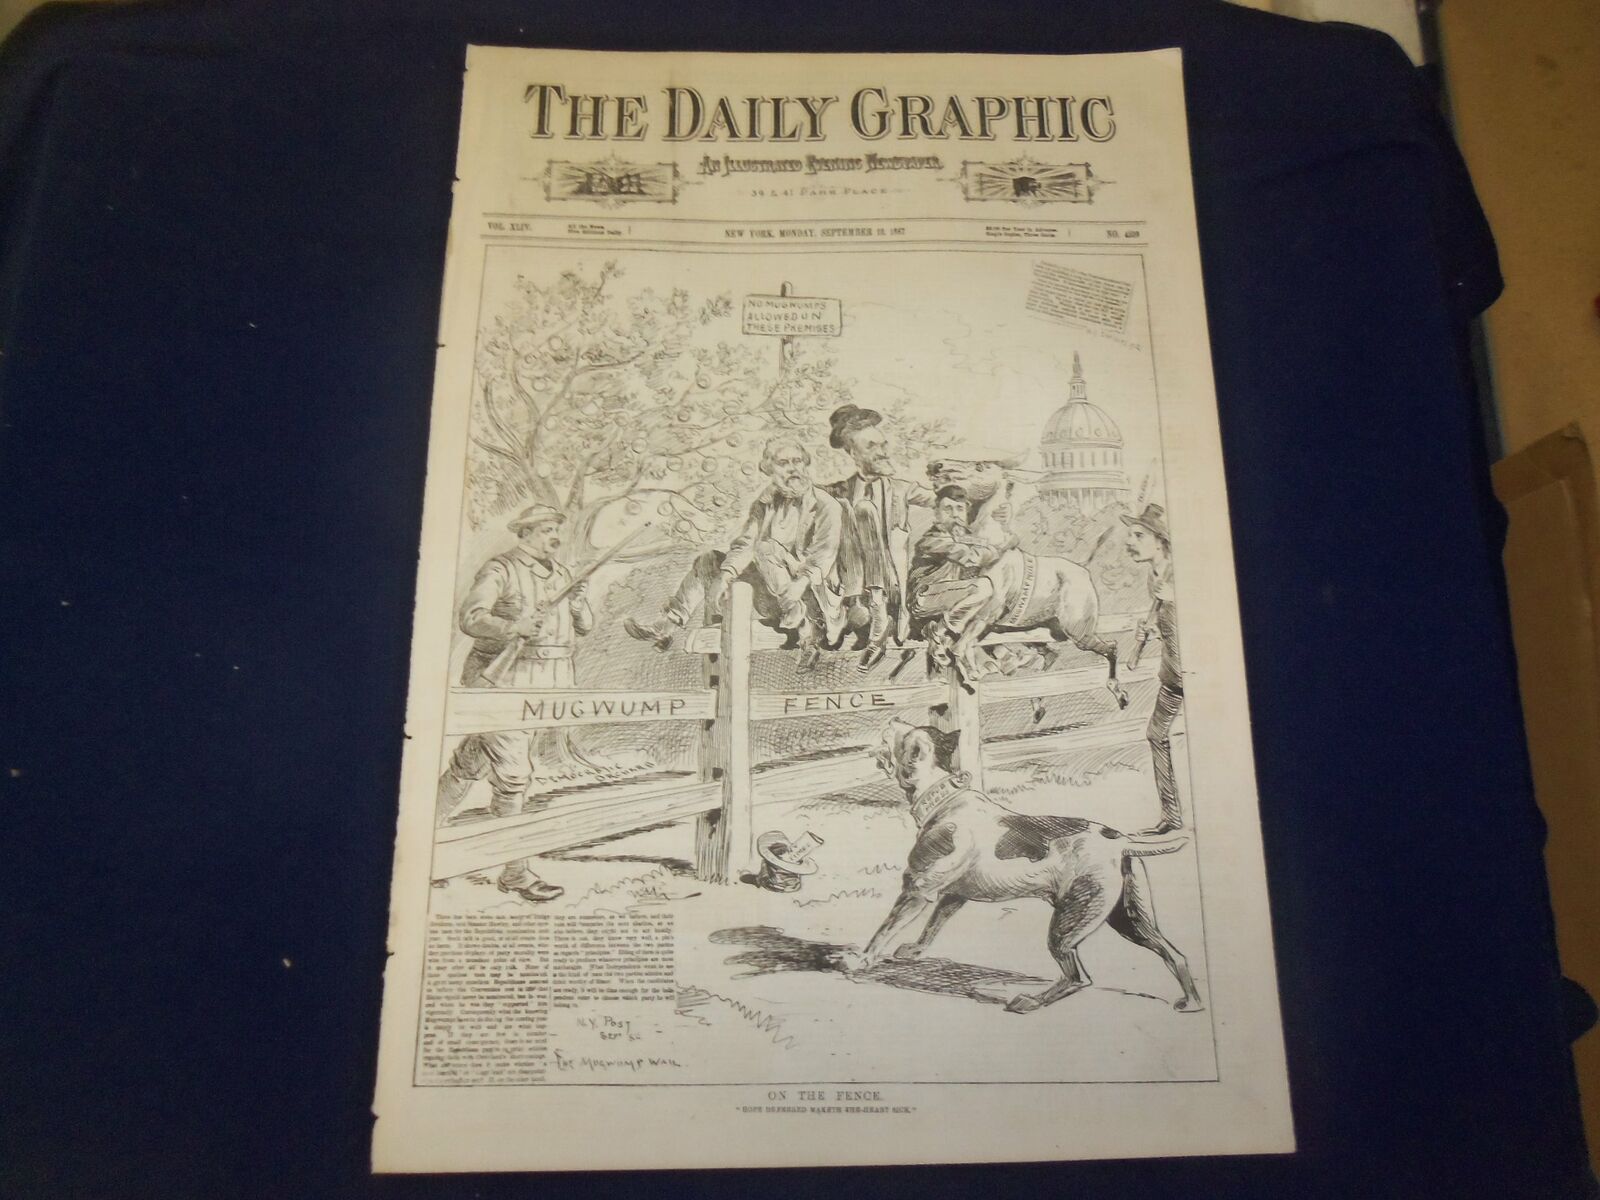 1887 SEPTEMBER 12 THE DAILY GRAPHIC NEWSPAPER - ON THE FENCE - NT 7668